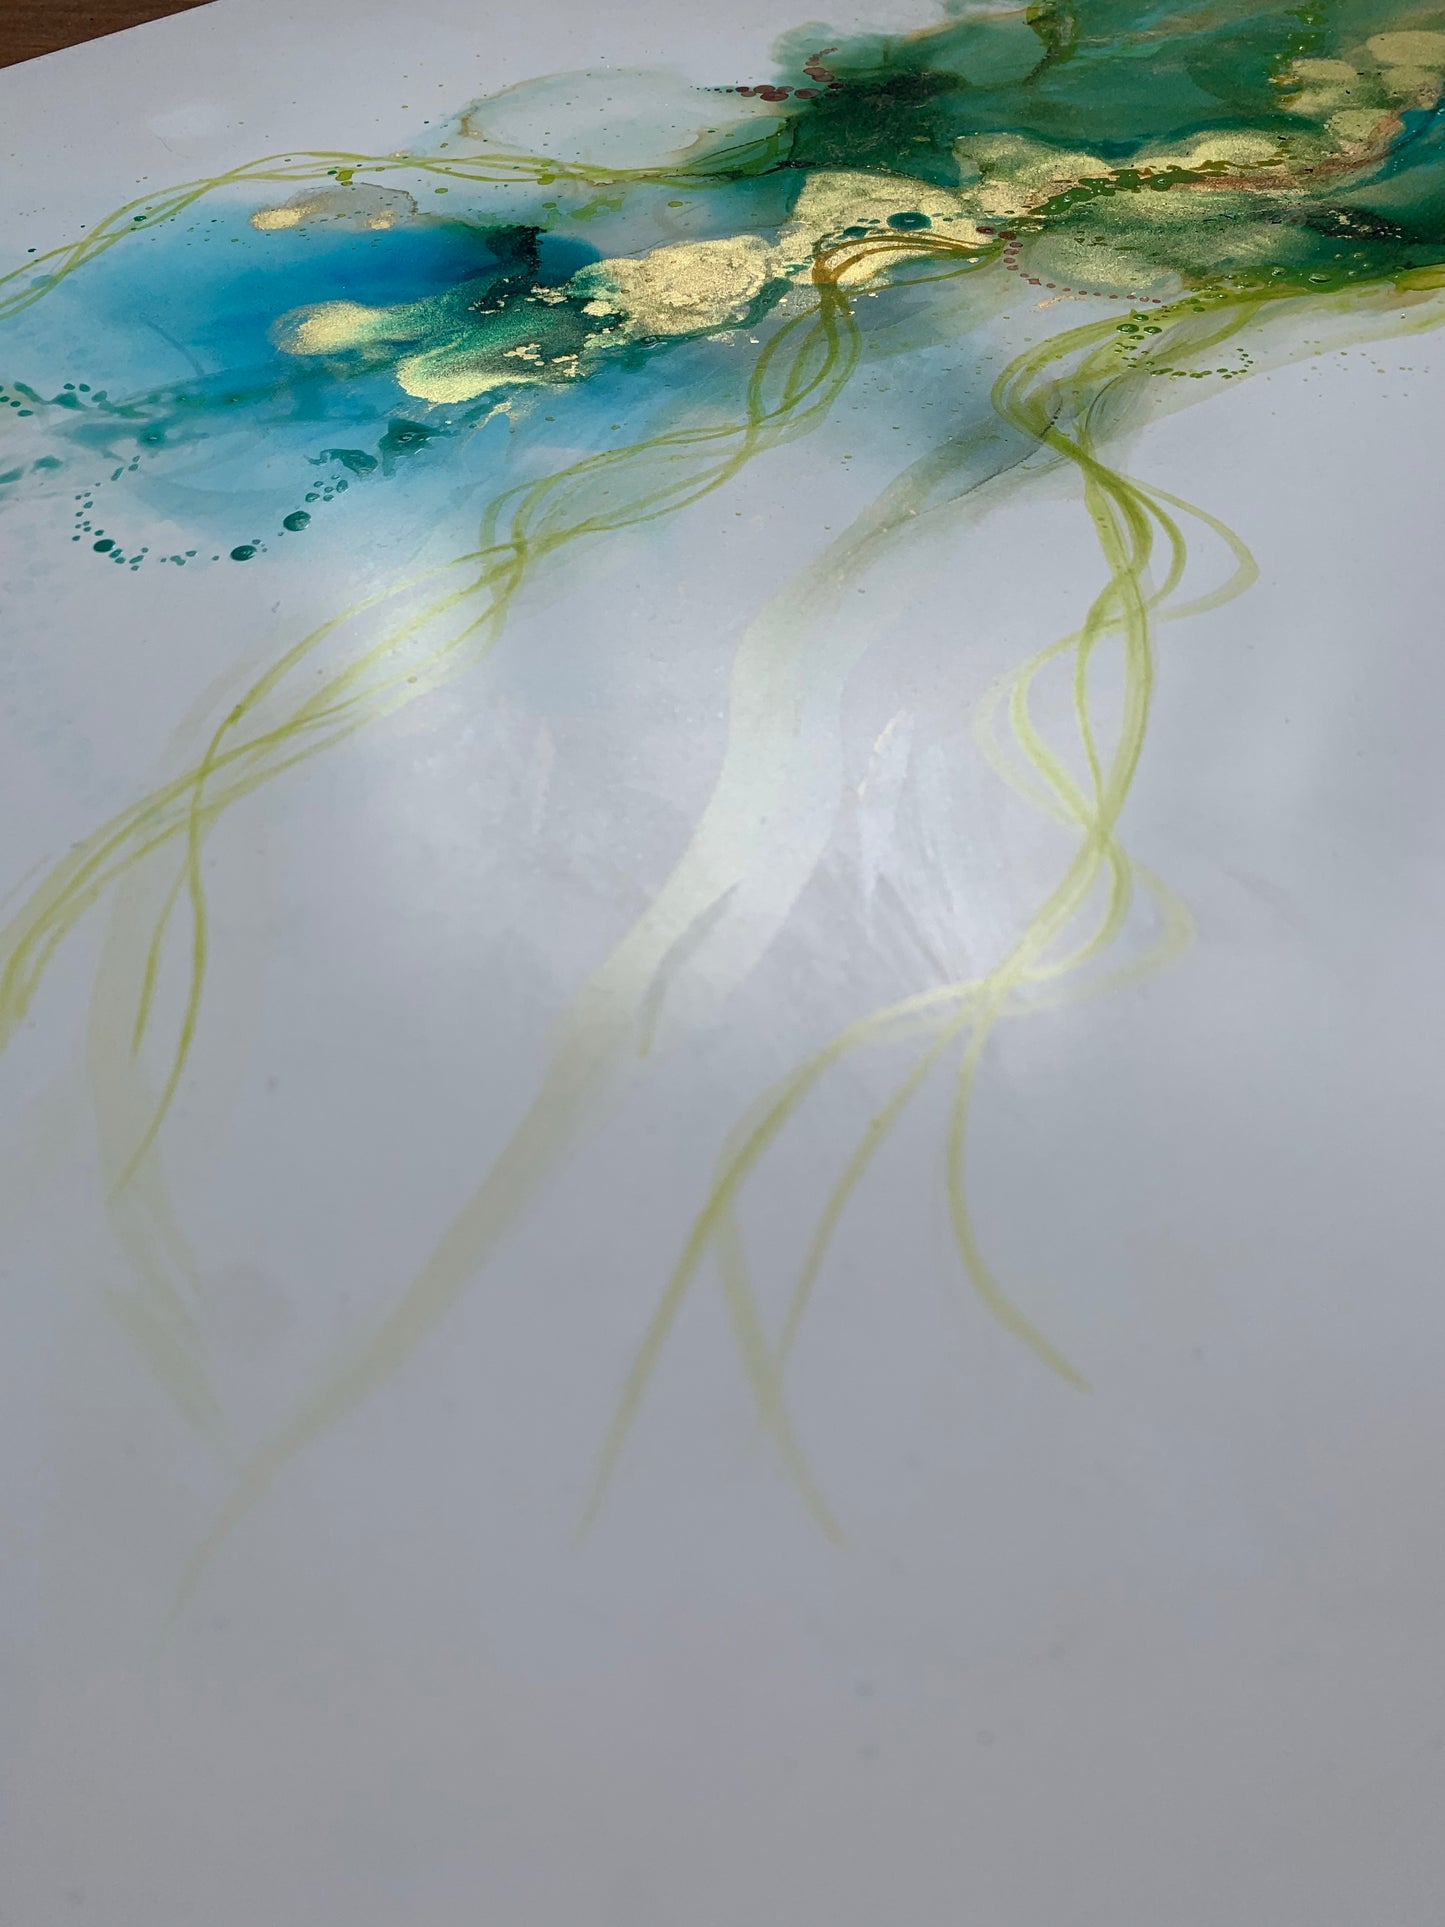 The Estuary - Original abstract painting in blues, green and gold.